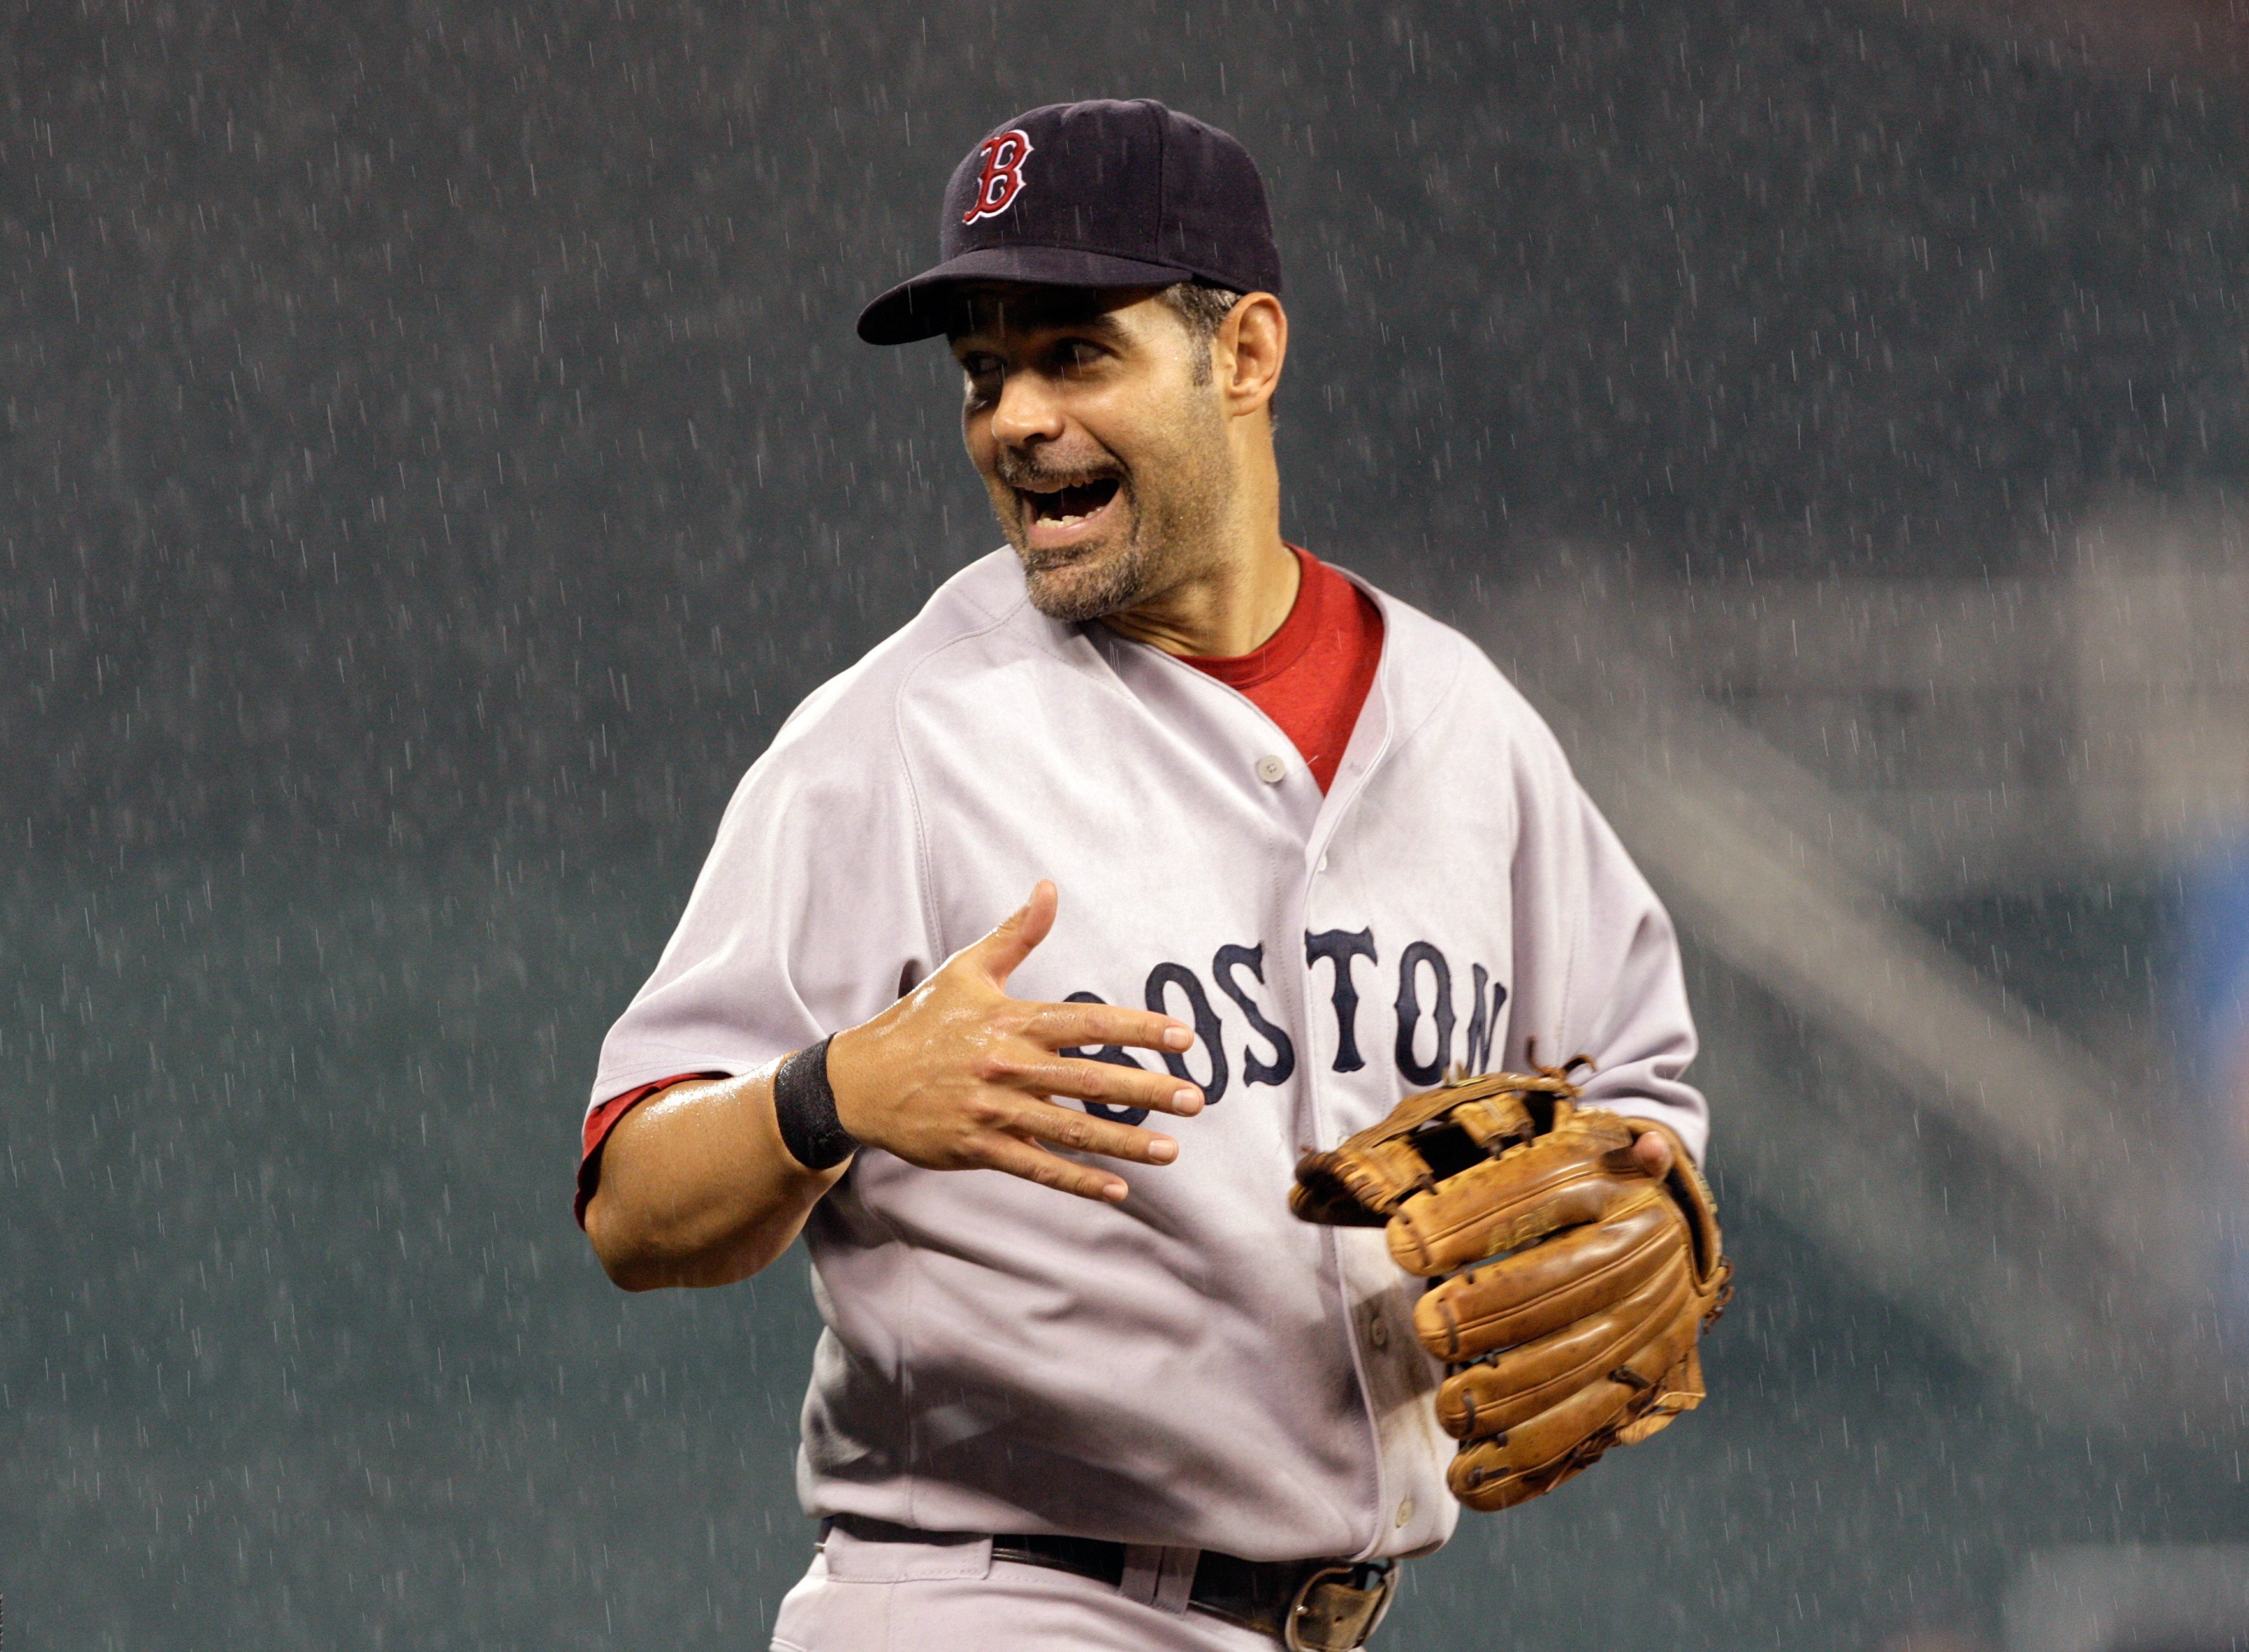 Mike Lowell Day updates